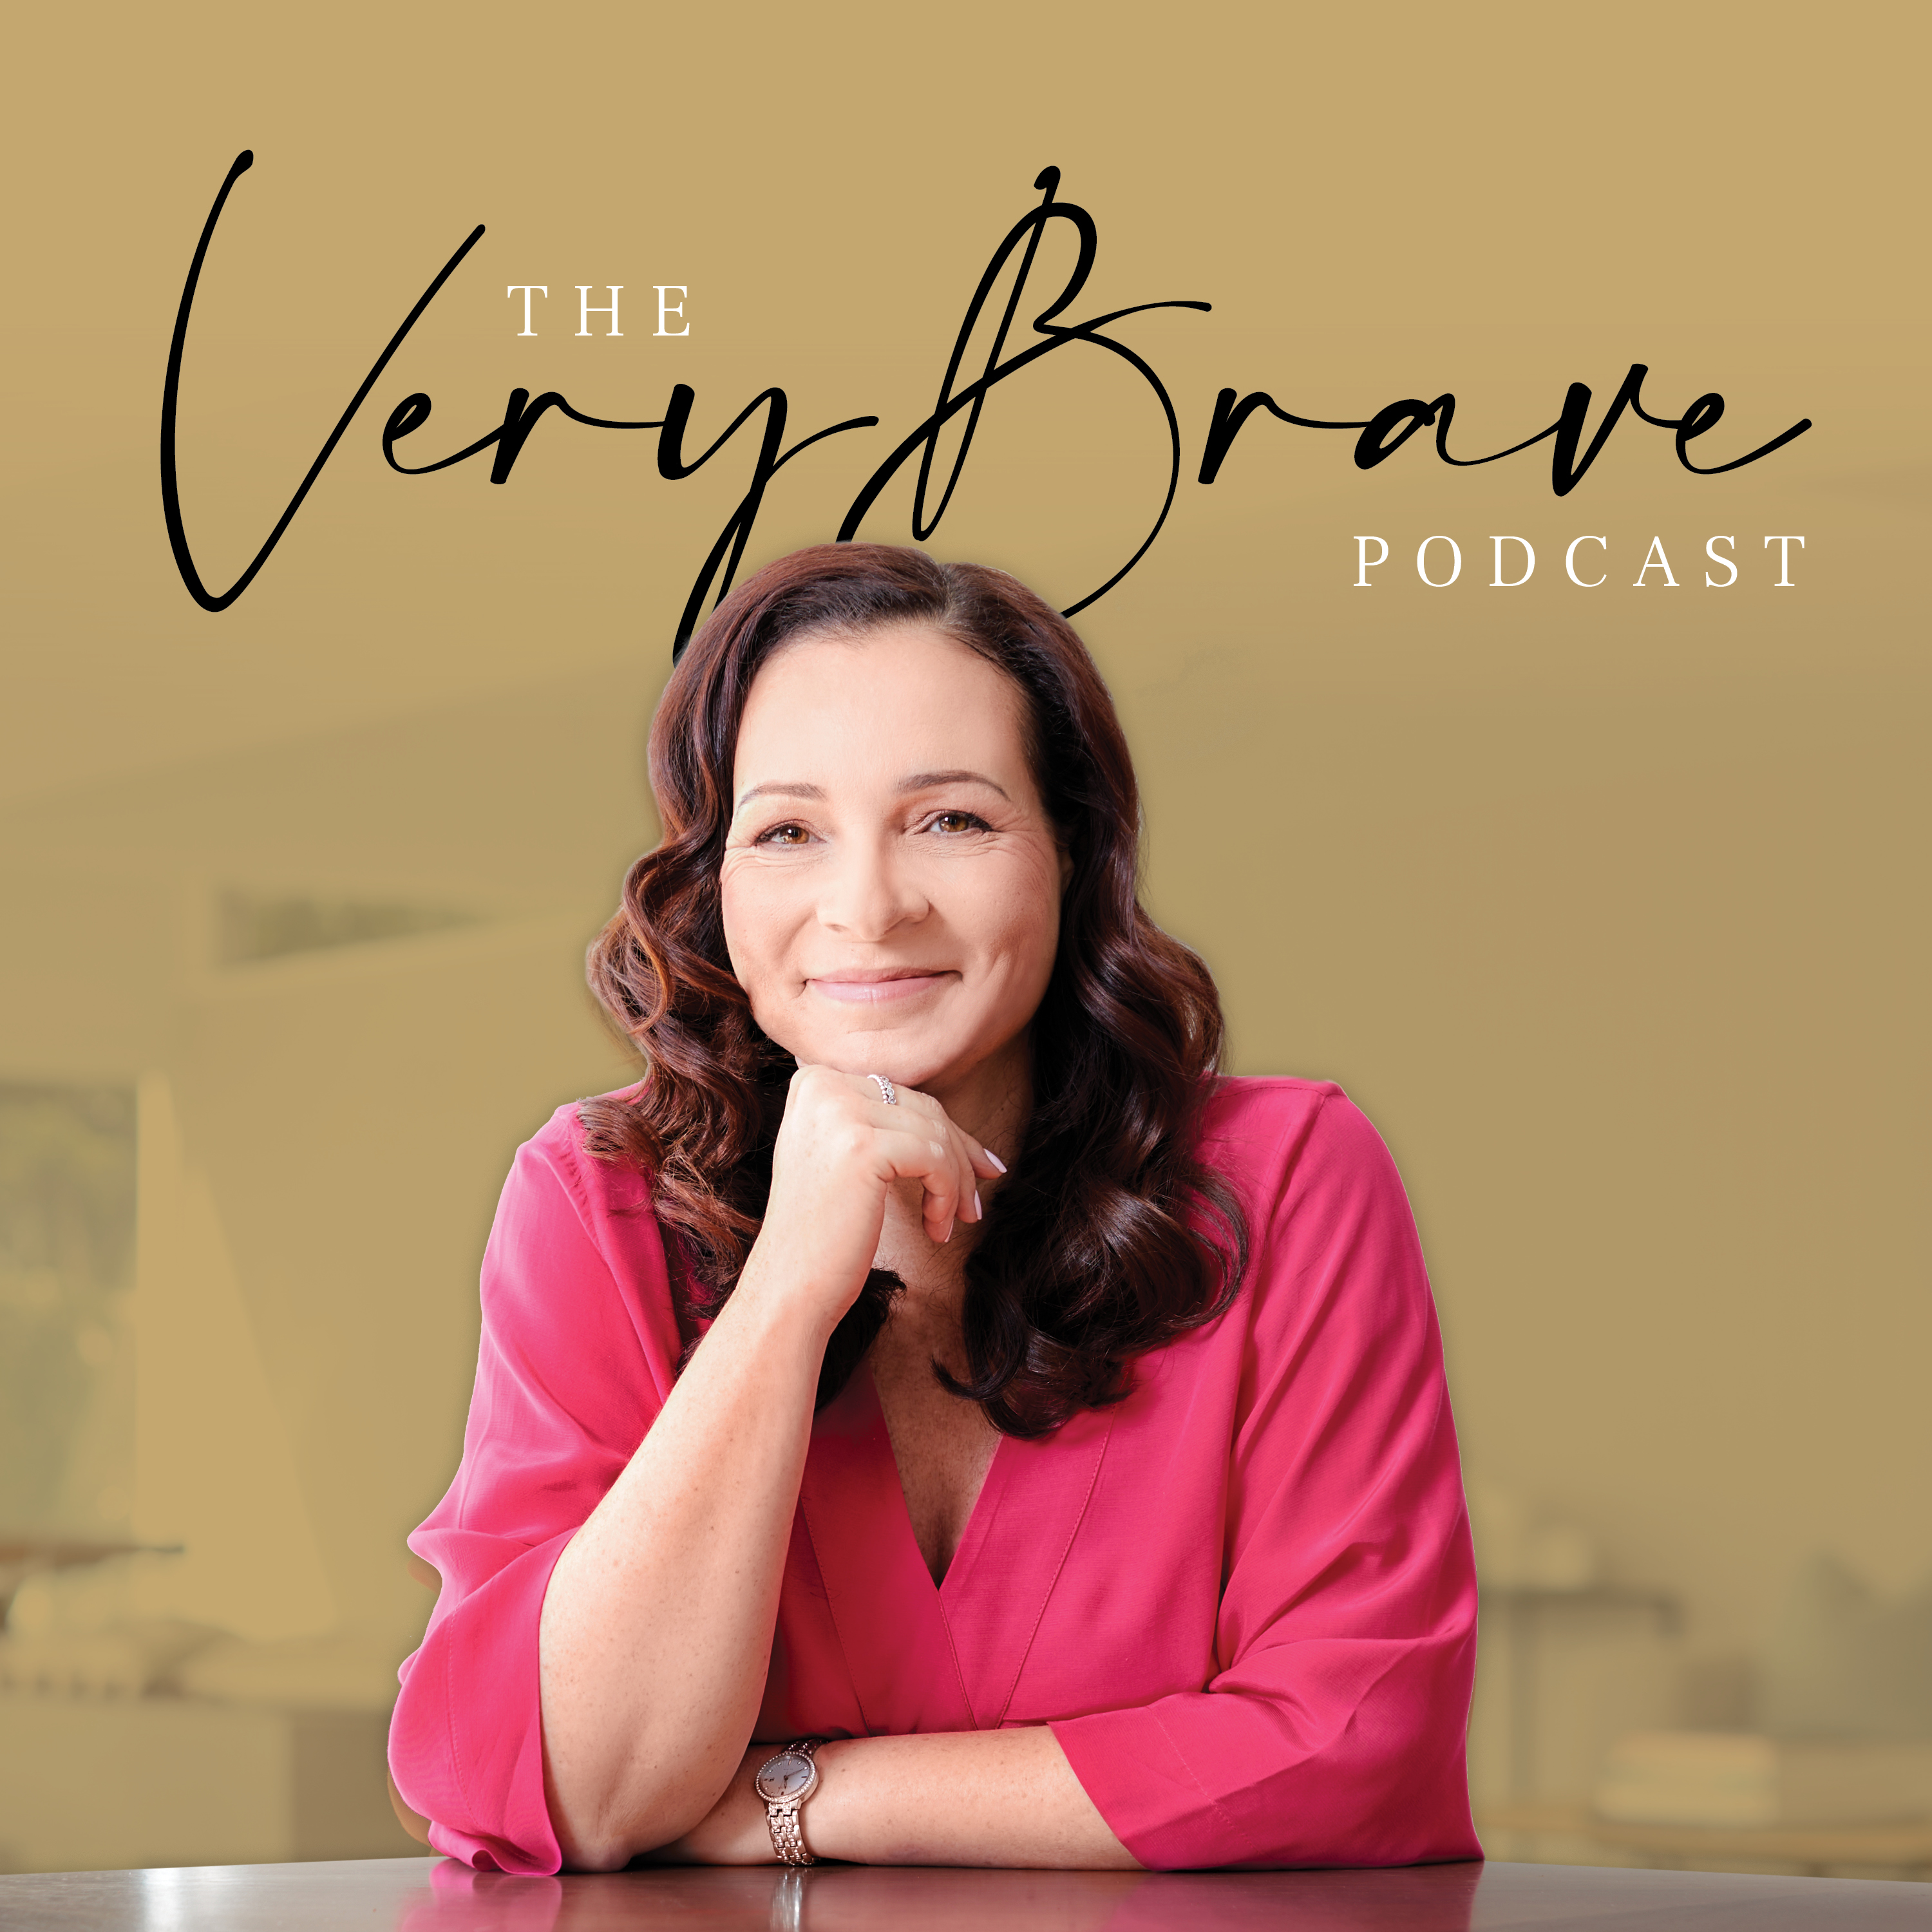 From Parliament to Brave by Design with Emma Husar